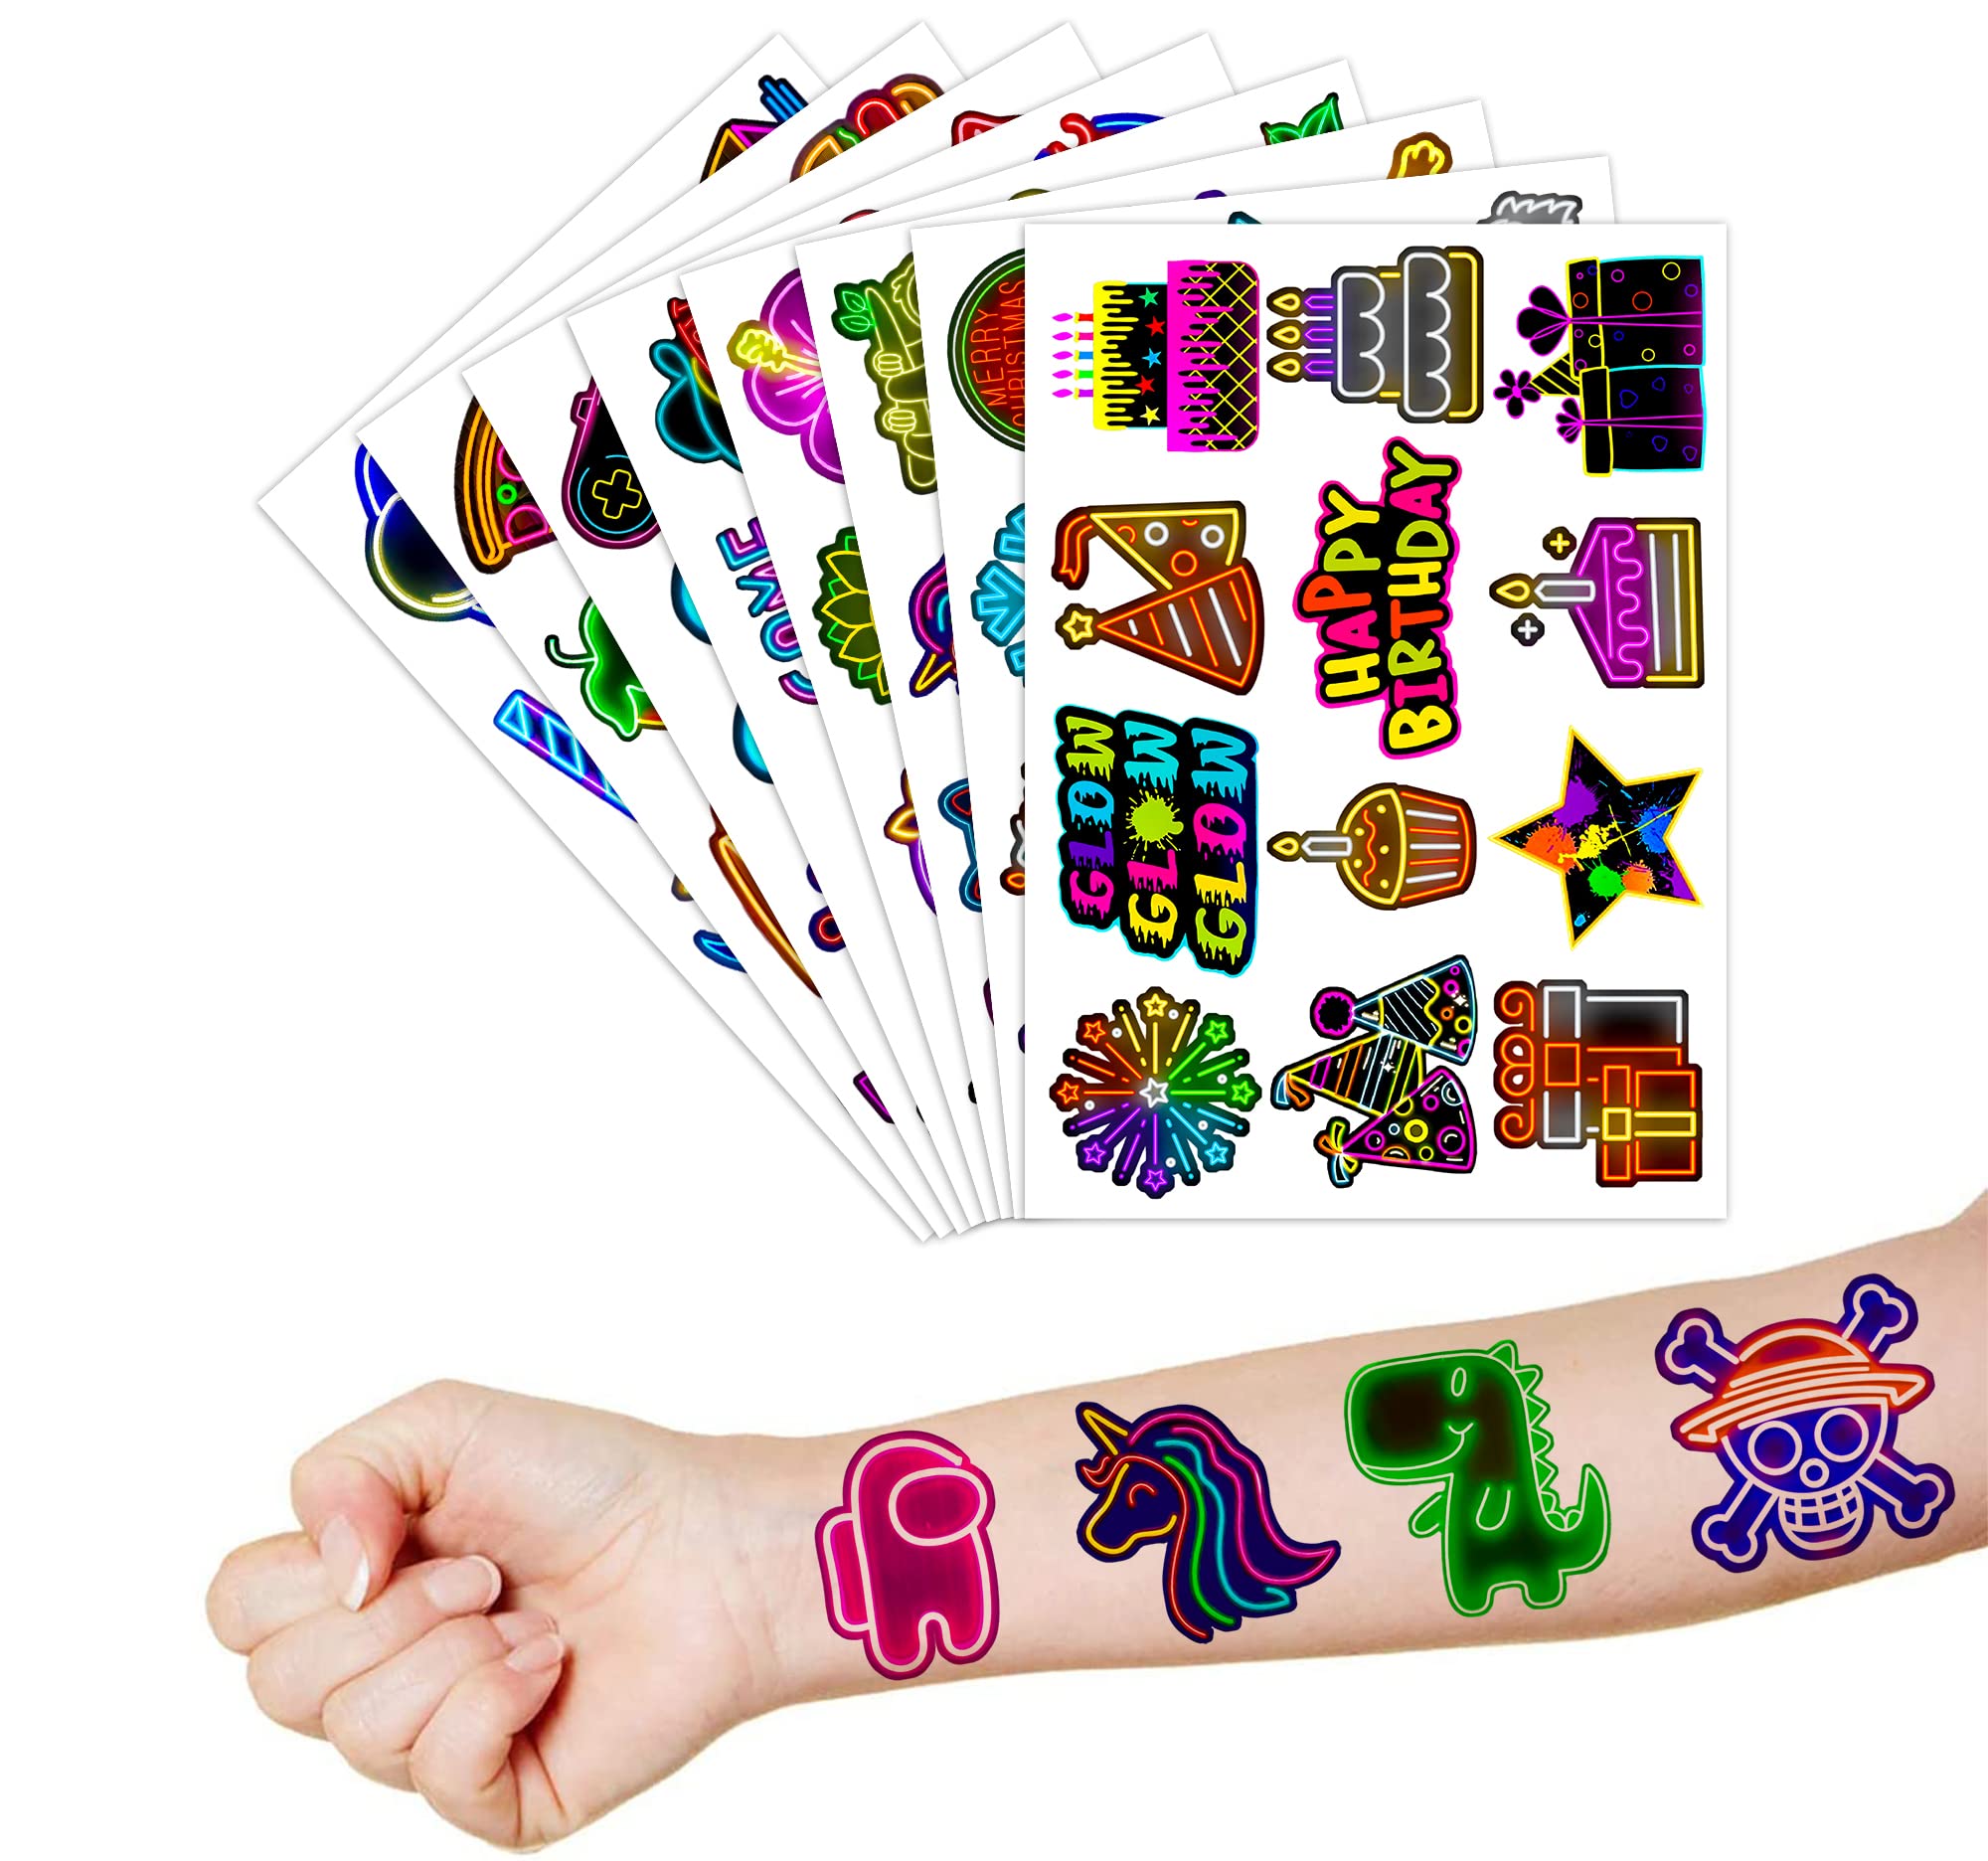 Neon Temporary Tattoos Theme Birthday Party Decorations Supplies Favors Decor 96 PCS 8 Sheets Cute Tattoo Stickers For Children Kids Boys Girls School Gifts Rewards Home Activity